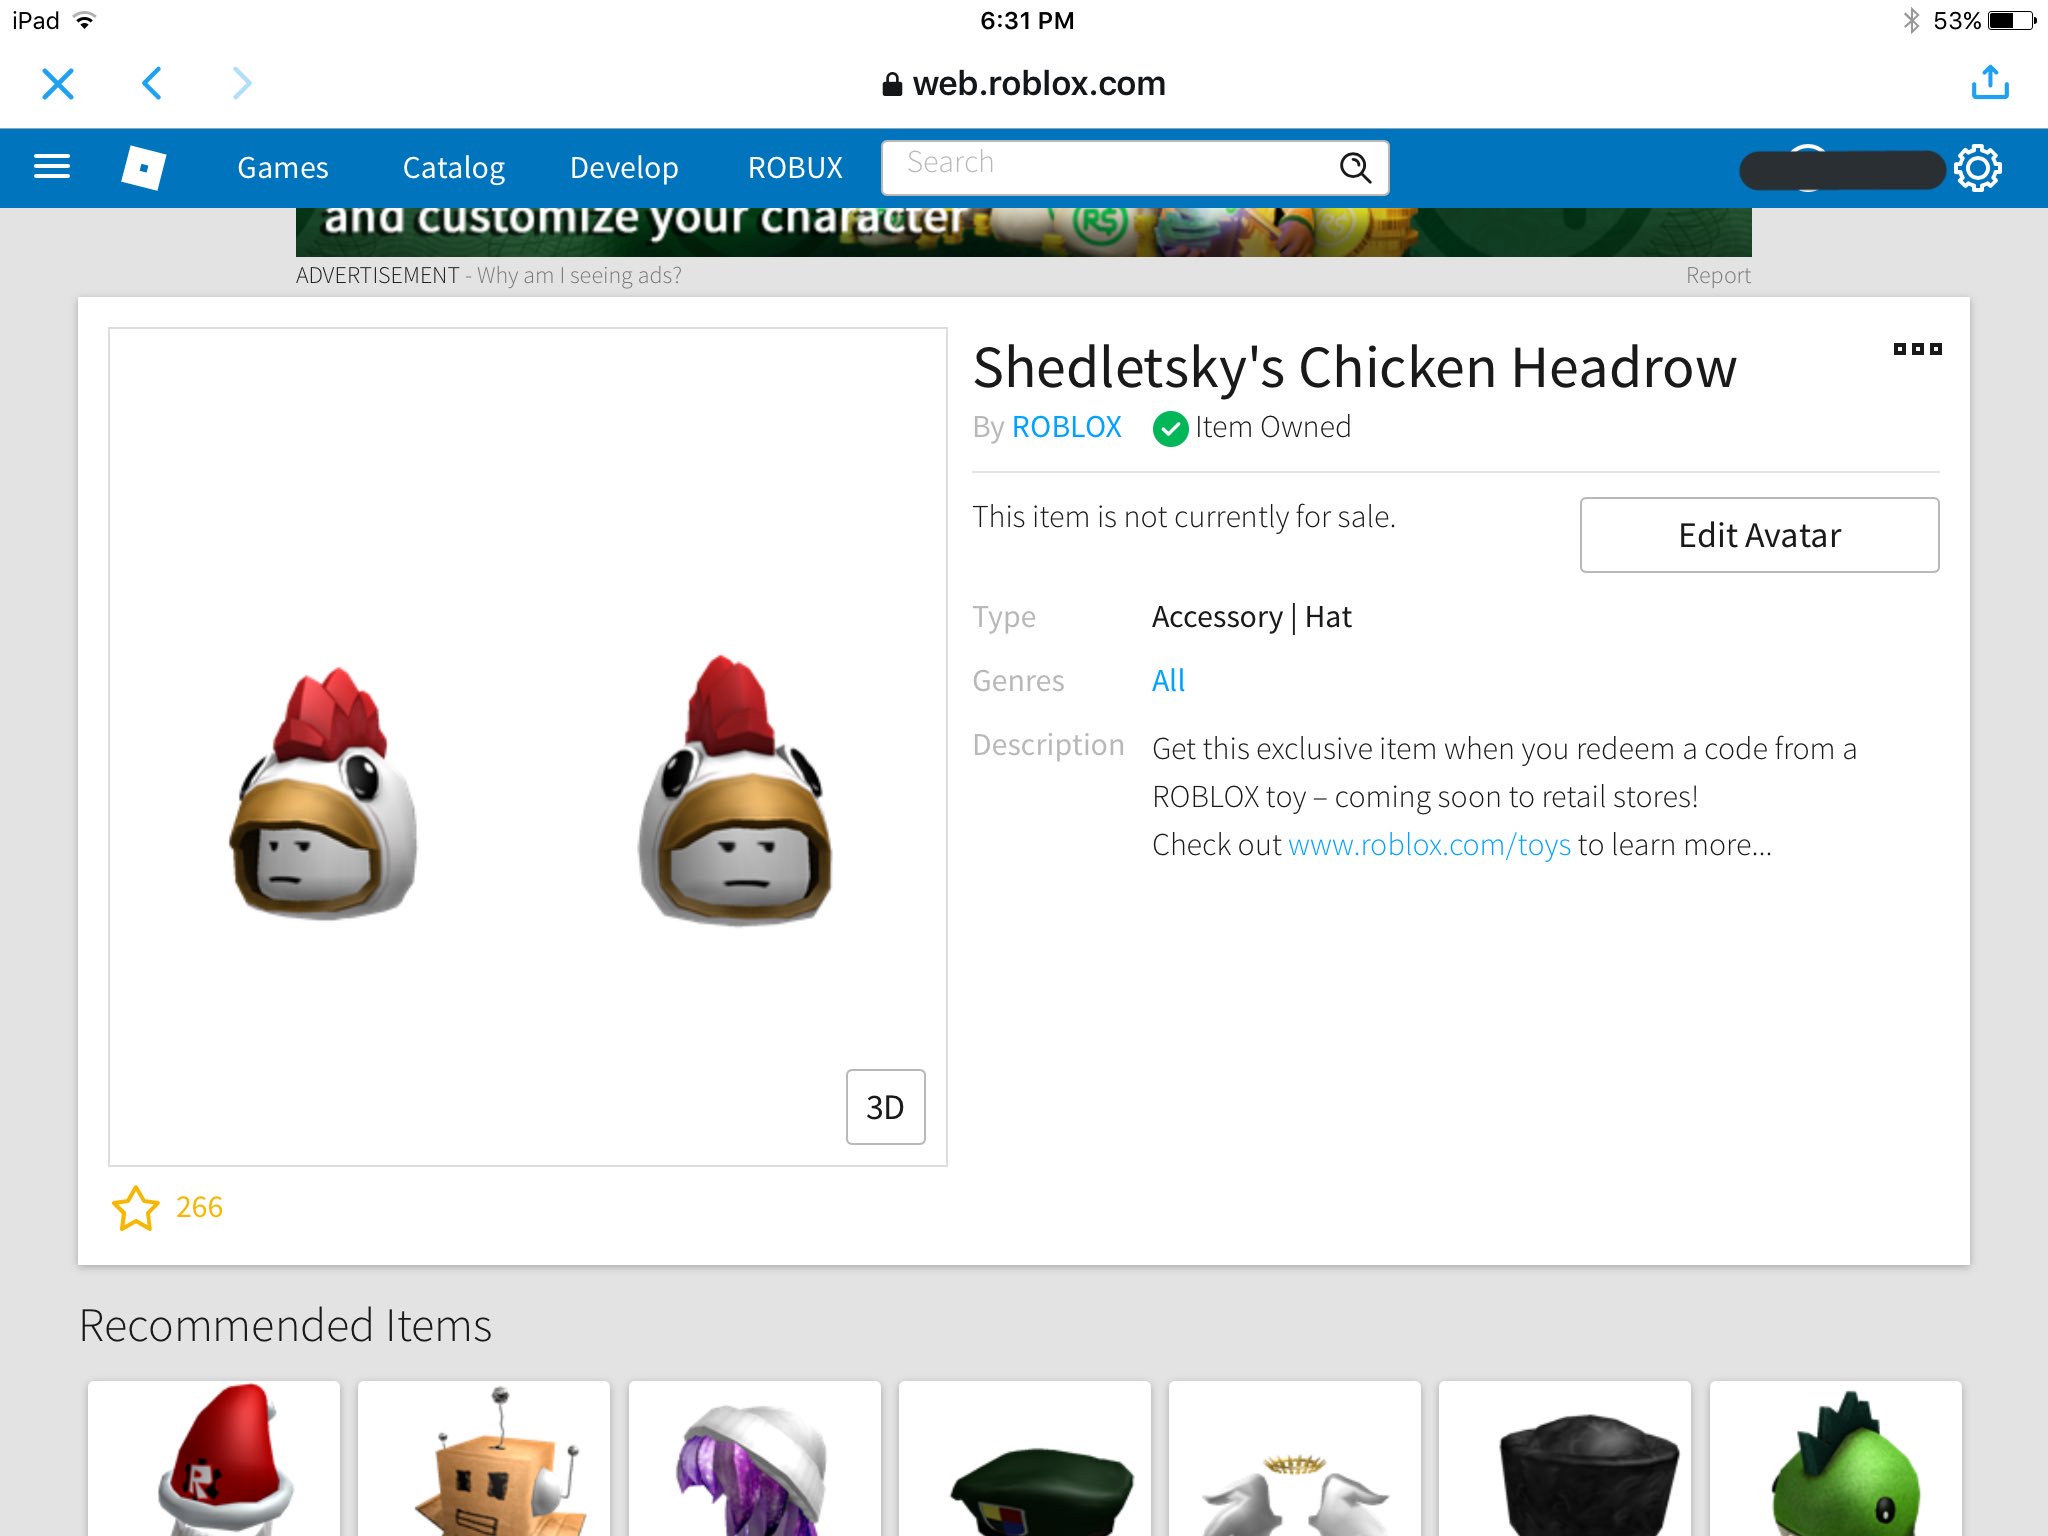 75602gamer On Twitter I Got Shedletsky S Chicken Headrow From Winning A Giveaway Thanks Hidden Graphics All I Want Now Is The Cane - red headrow roblox